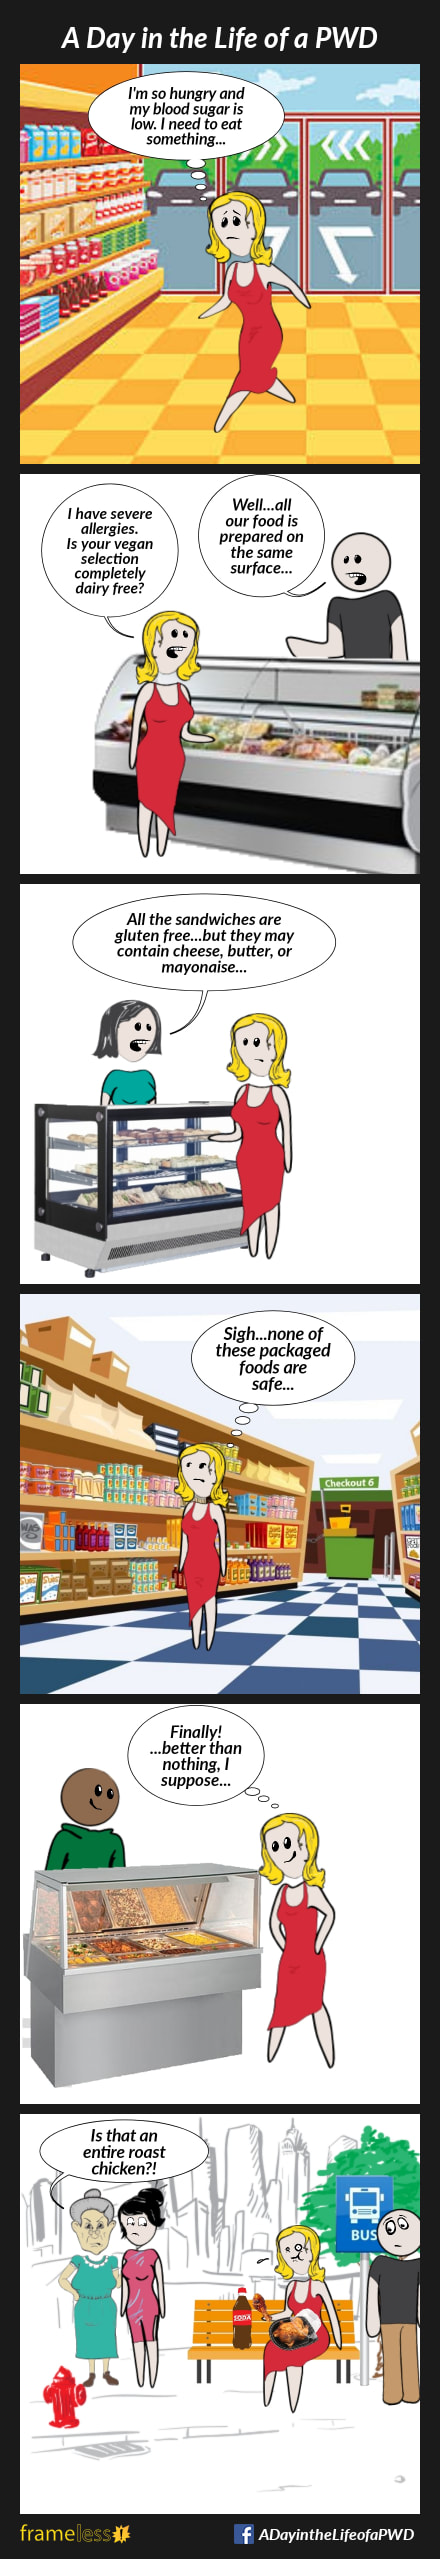 Frame 1:
A worried woman enters a grocery store.
WOMAN (thinking): I'm so hungry, and my blood sugar is low. I need to eat something...

Frame 2:
The woman is at the deli counter.
WOMAN: I have severe allergies. Is your vegan selection completely dairy free?
CLERK: Well...all our food is prepared on the same surface.

Frame 3:
The woman is at a soup and sandwich counter.
CLERK: All the sandwiches are gluten free, but they may contain cheese, butter, or mayonnaise. 

Frame 4:
The woman is in an isle, looking at 5he shelves.
WOMAN (thinking): Sigh...none of these packaged foods are safe...

Frame 5:
The woman is at a hot prepared food counter.
WOMAN (thinking) Finally!...better than nothing, I suppose...

Frame 6:
The woman is sitting at a bus stop eating a roasted chicken and drinking a bottle of soda. Several people stare at her. 
ELDERLY WOMAN: Is that an entire roast chicken?!